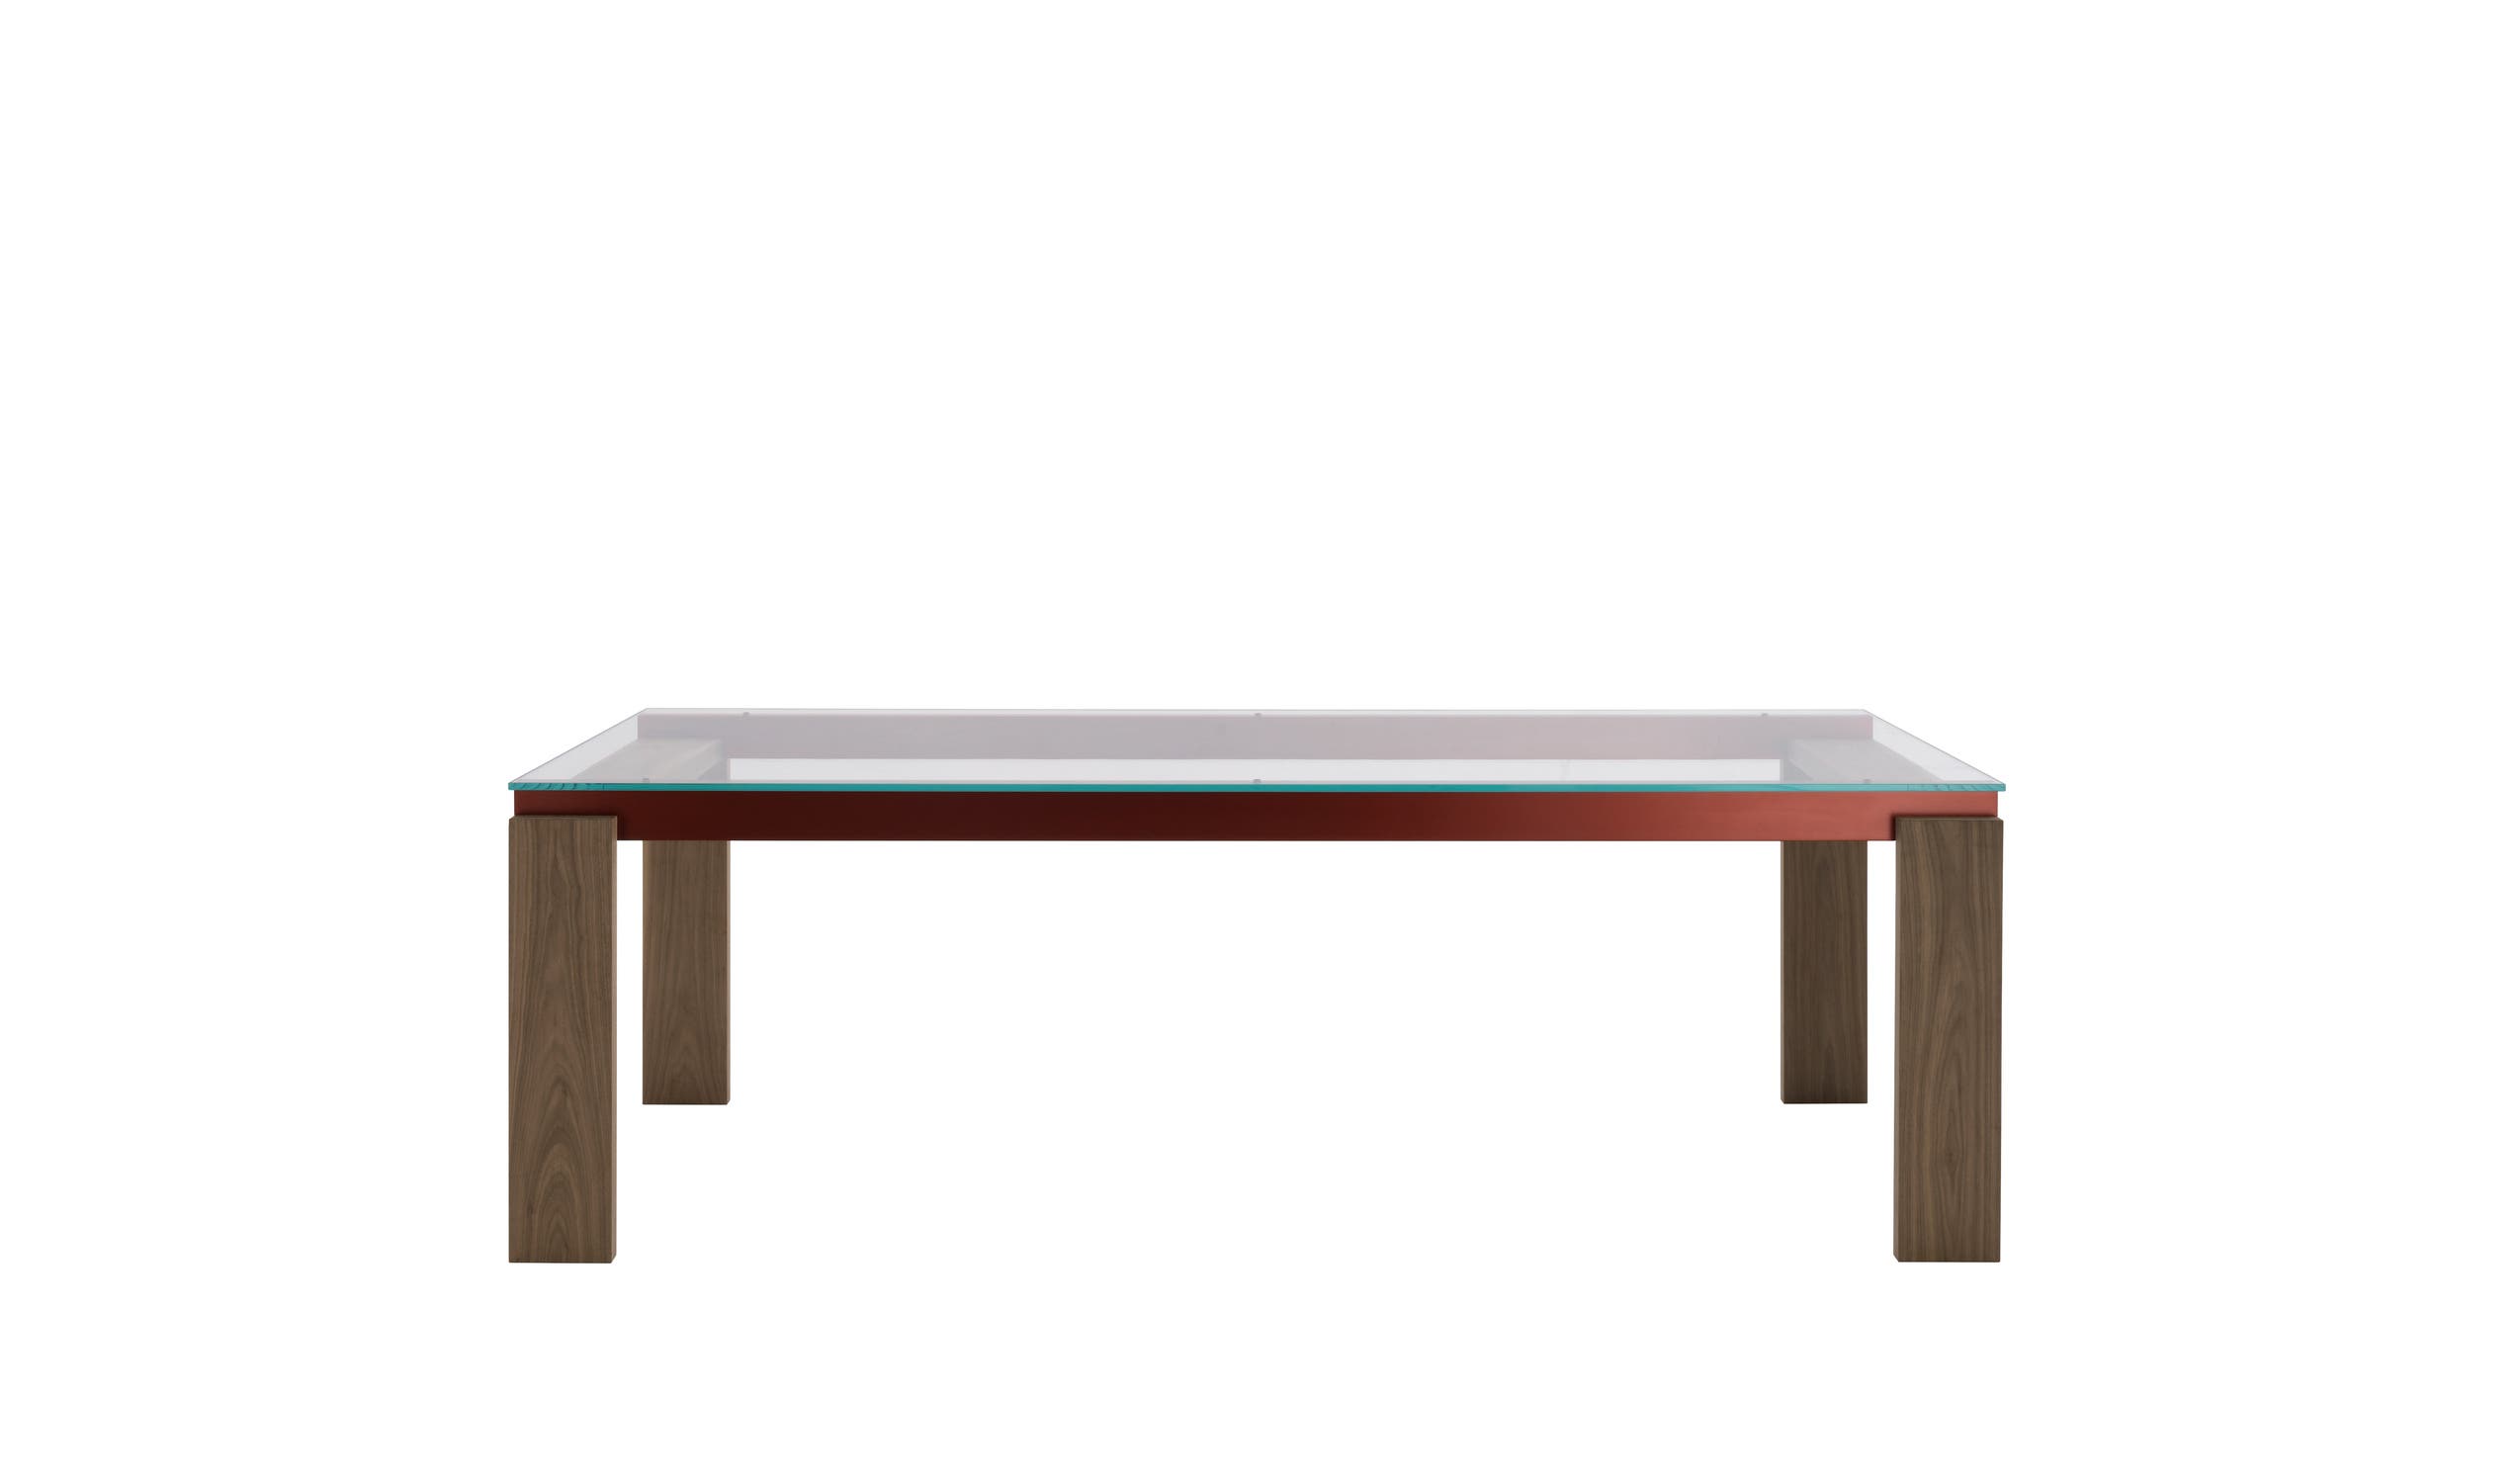 Italian designer modern tables - Parallel Structure Tables